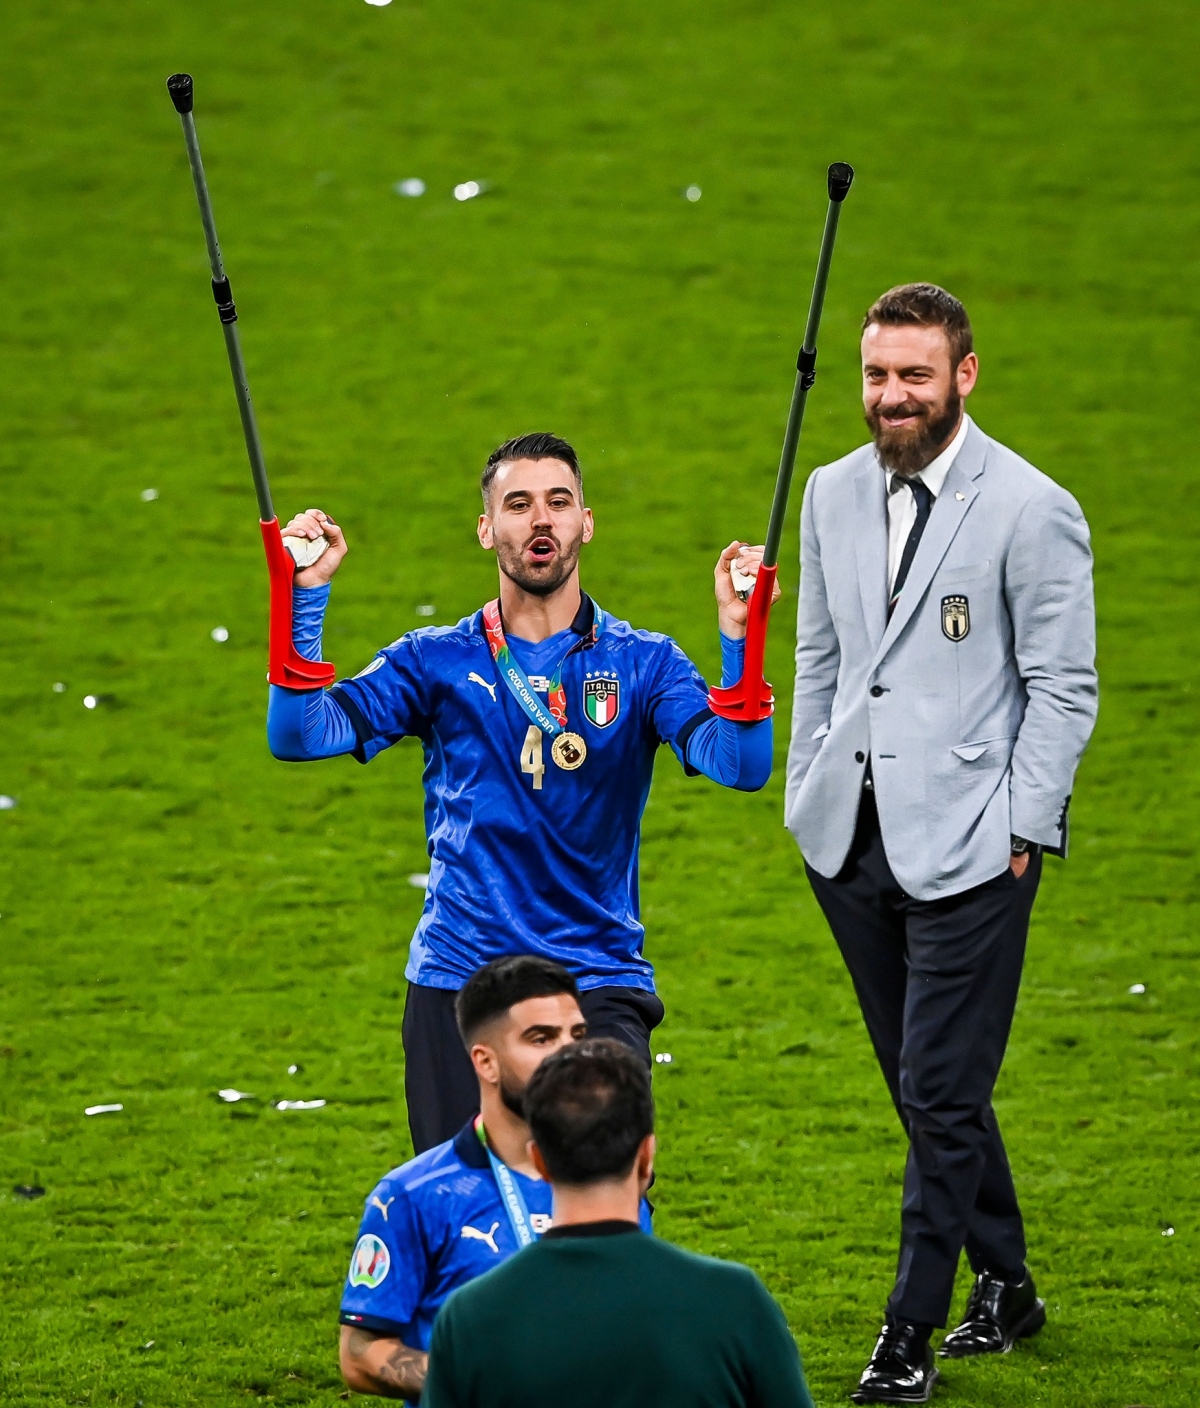 can canh Dt italia nang cup, an mung chuc vo dich euro 2021 hinh anh 3